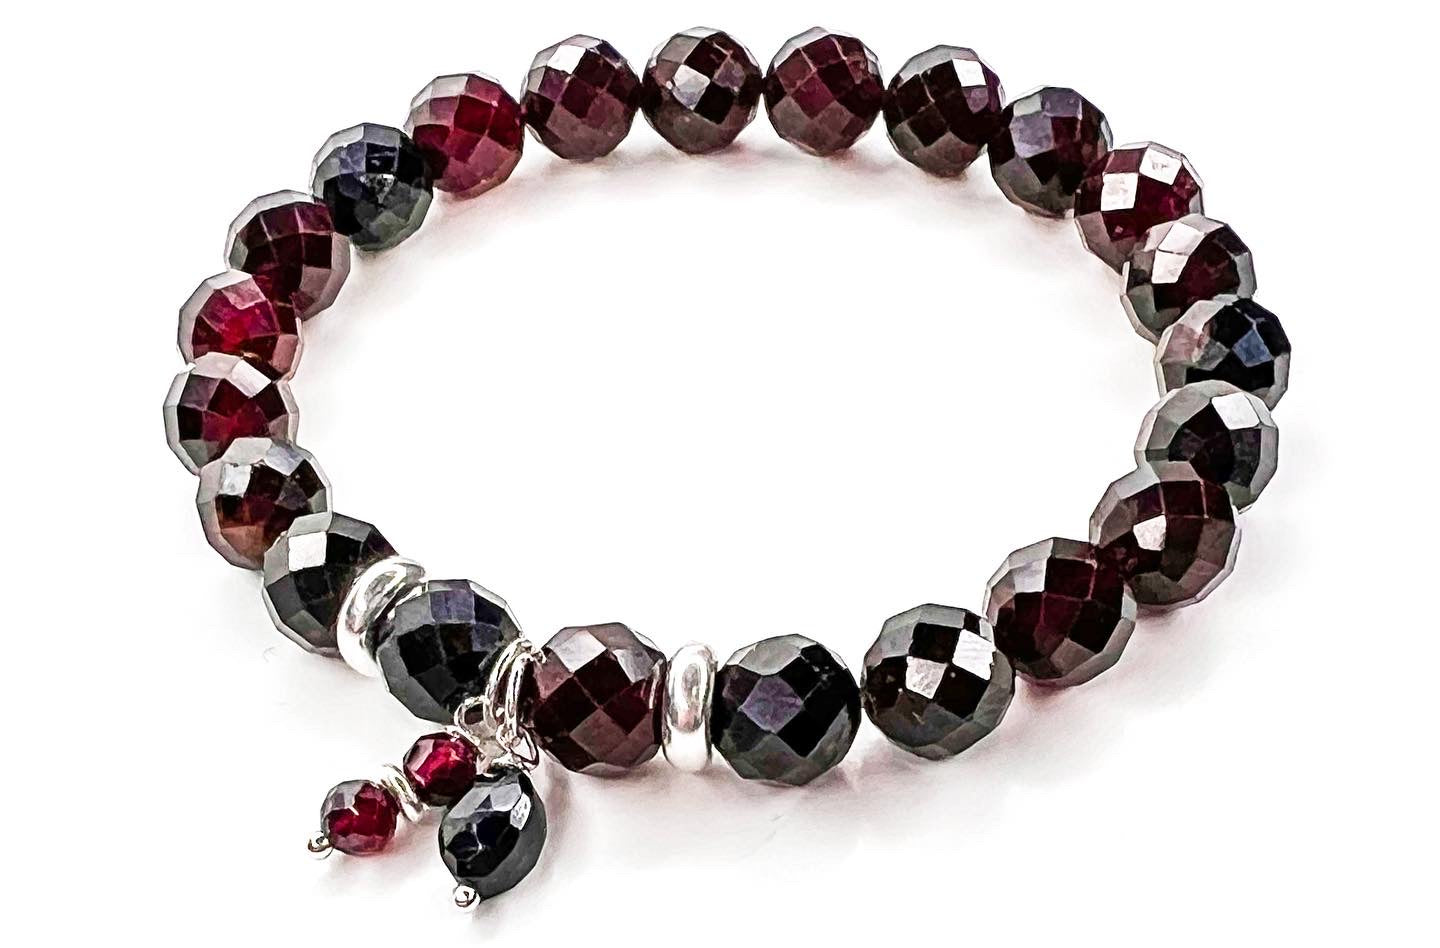 Faceted Garnet and Black Spinel mala in sterling silver